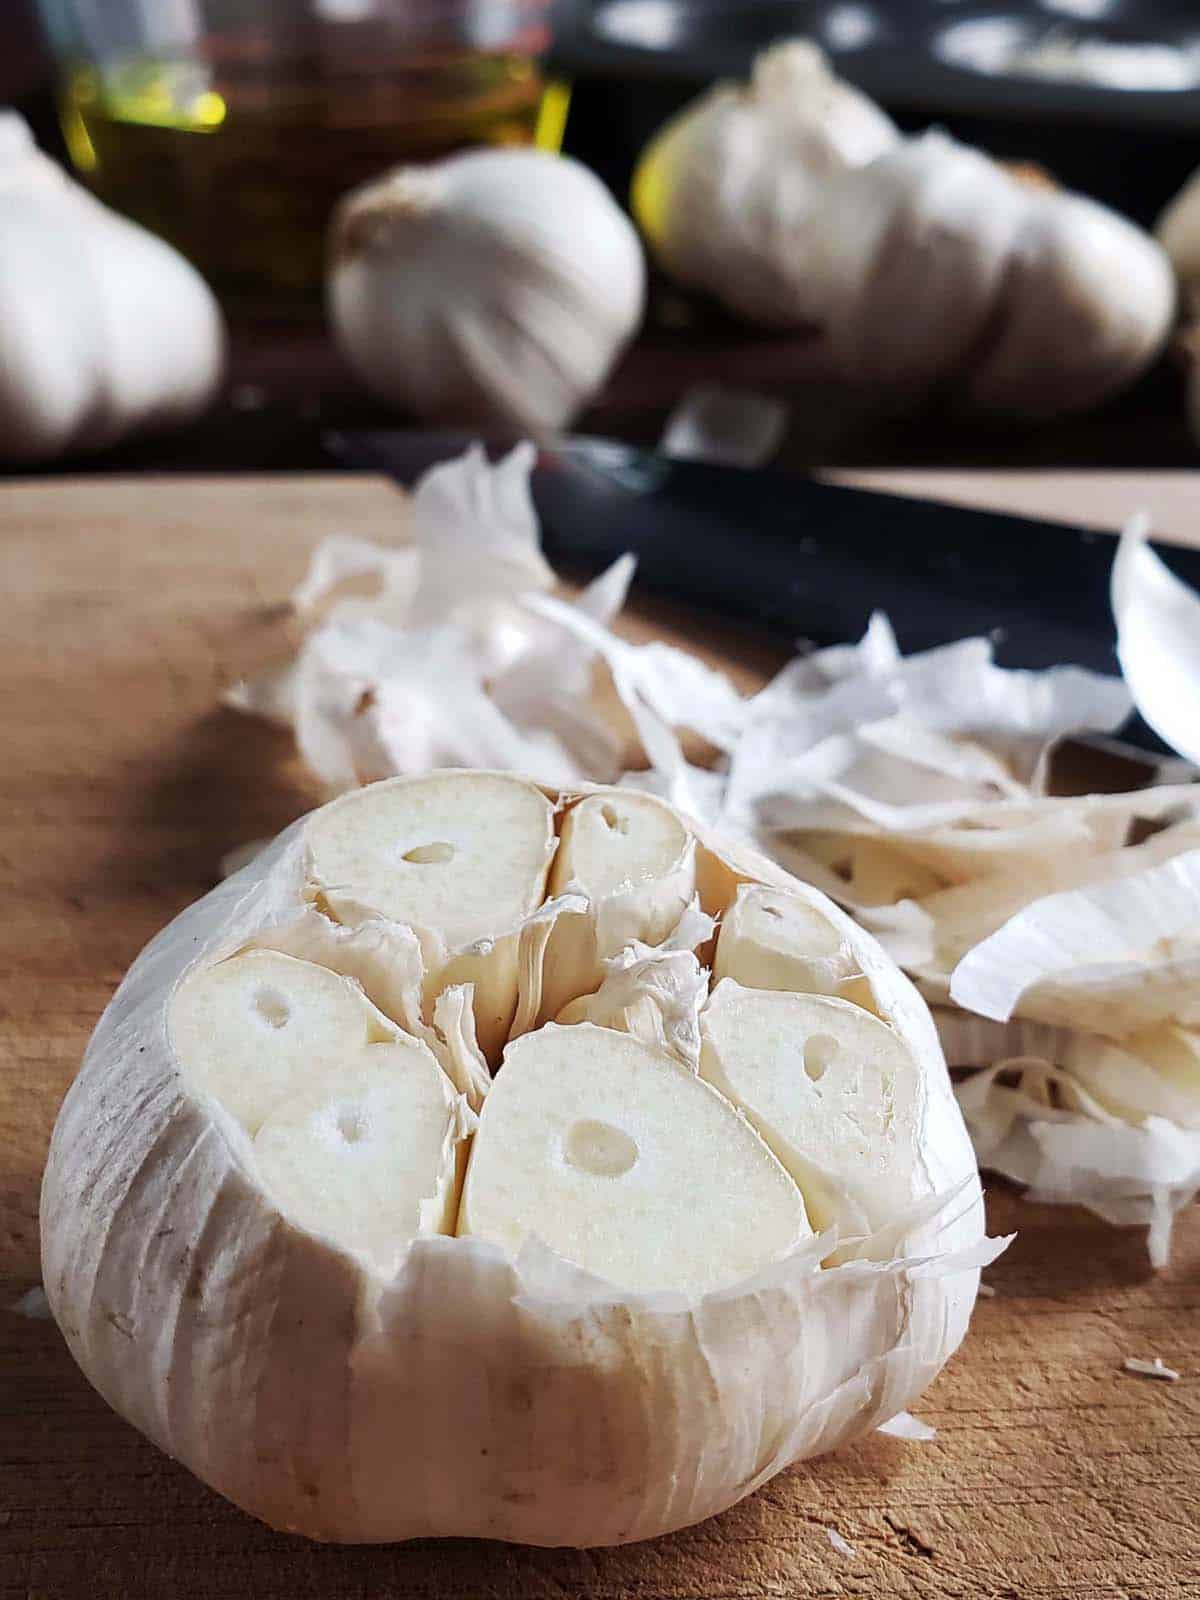 Head of garlic on top of a cutting board with the top sliced off.